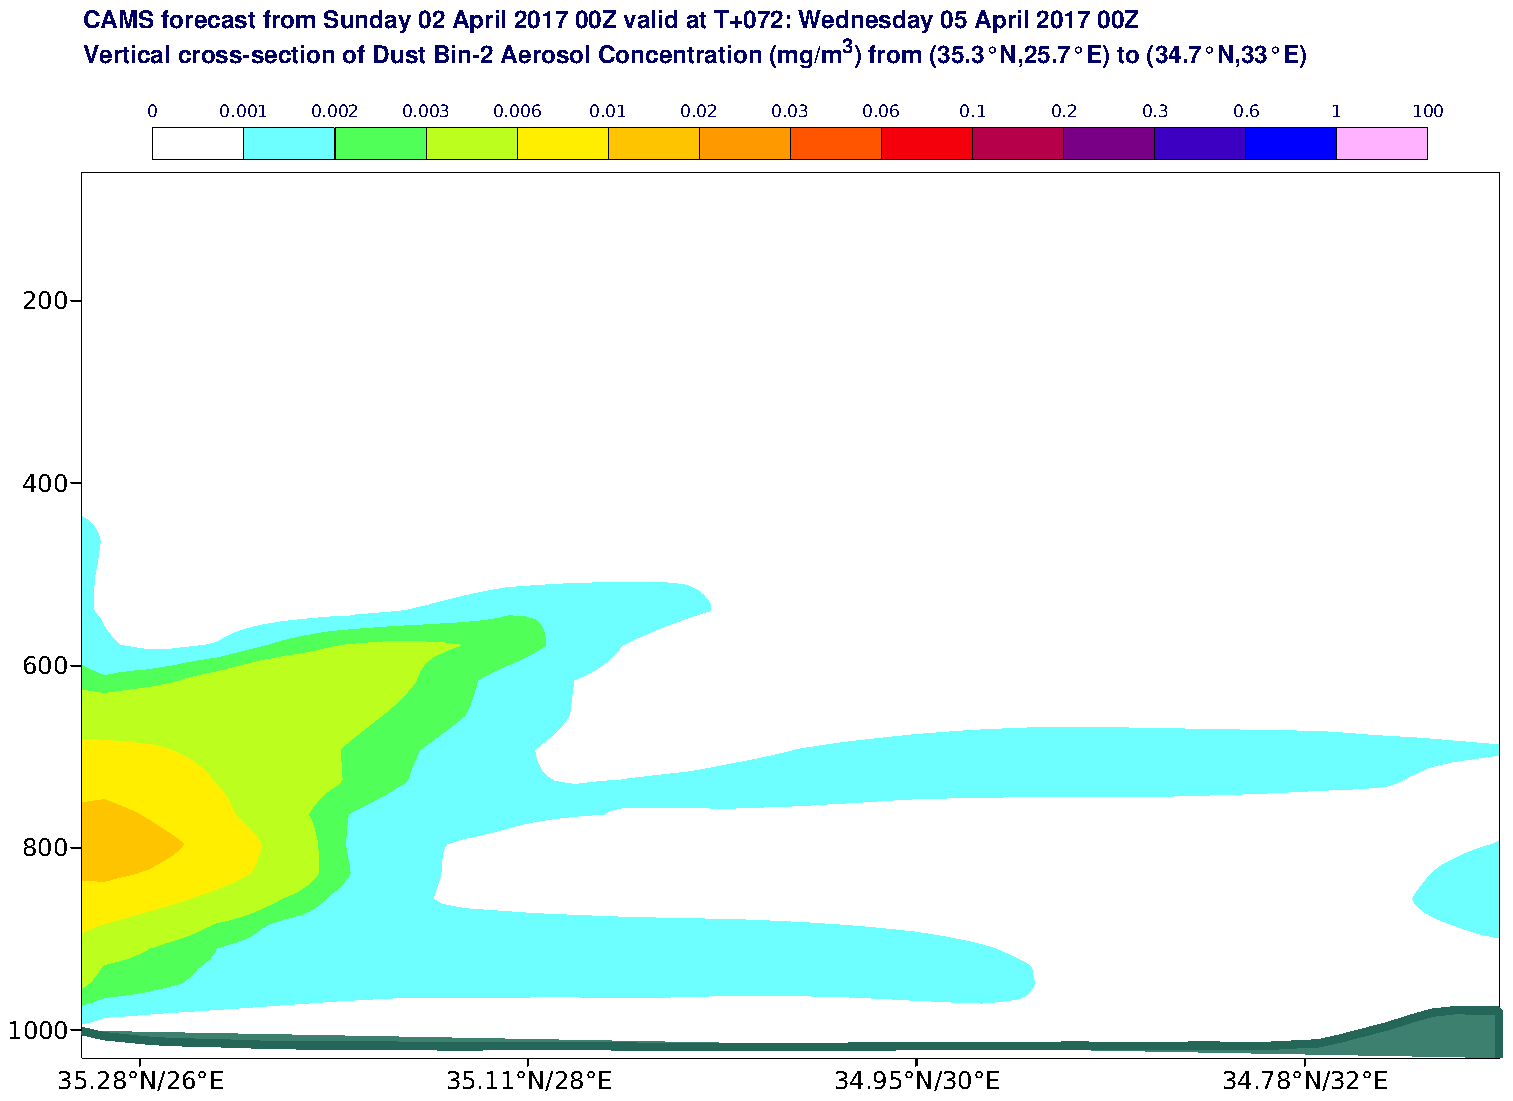 Vertical cross-section of Dust Bin-2 Aerosol Concentration (mg/m3) valid at T72 - 2017-04-05 00:00